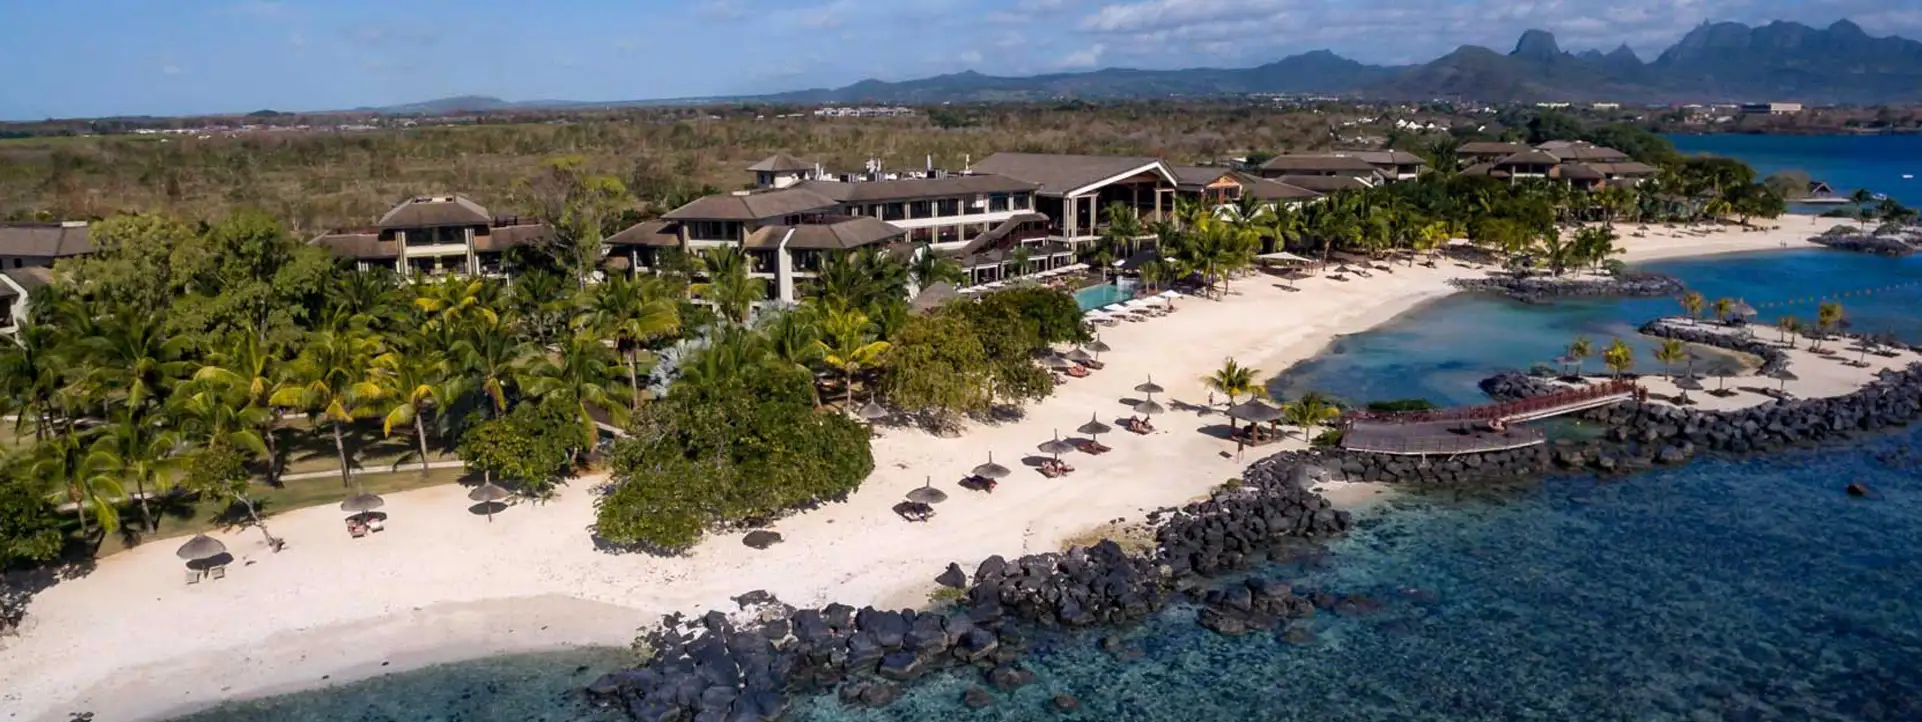 INTERCONTINENTAL-MAURITIUS-beach-front-view